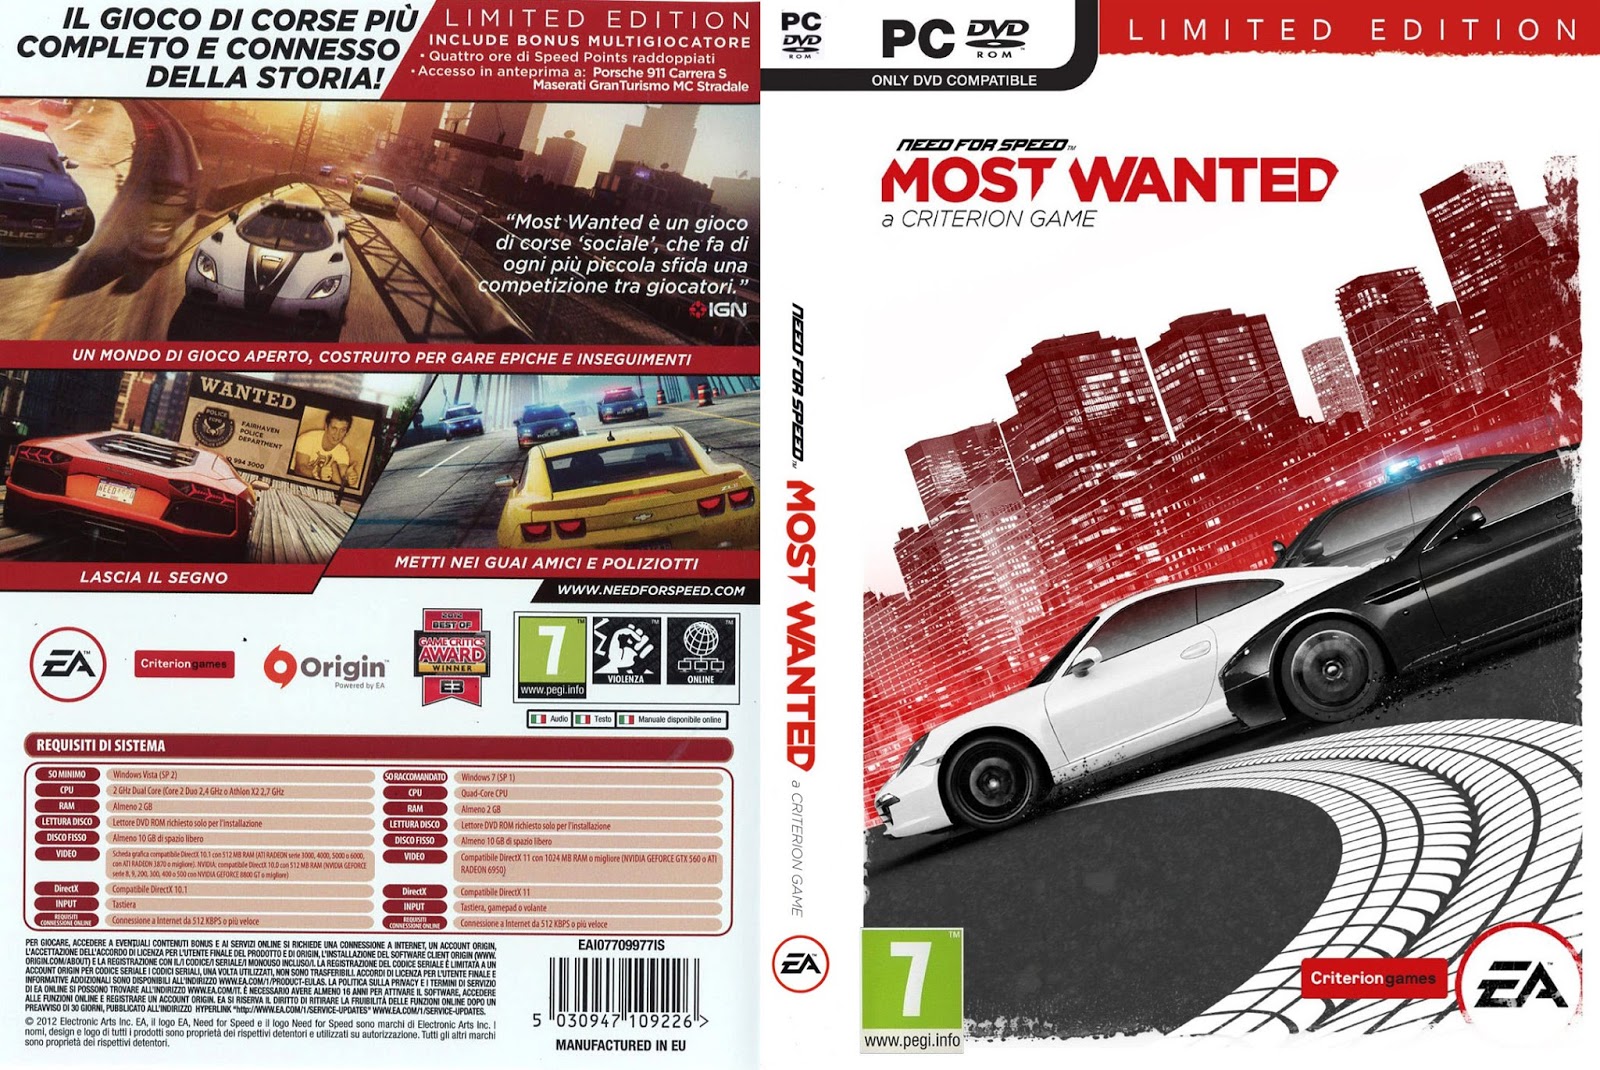 free download full version of nfs most wanted for pc